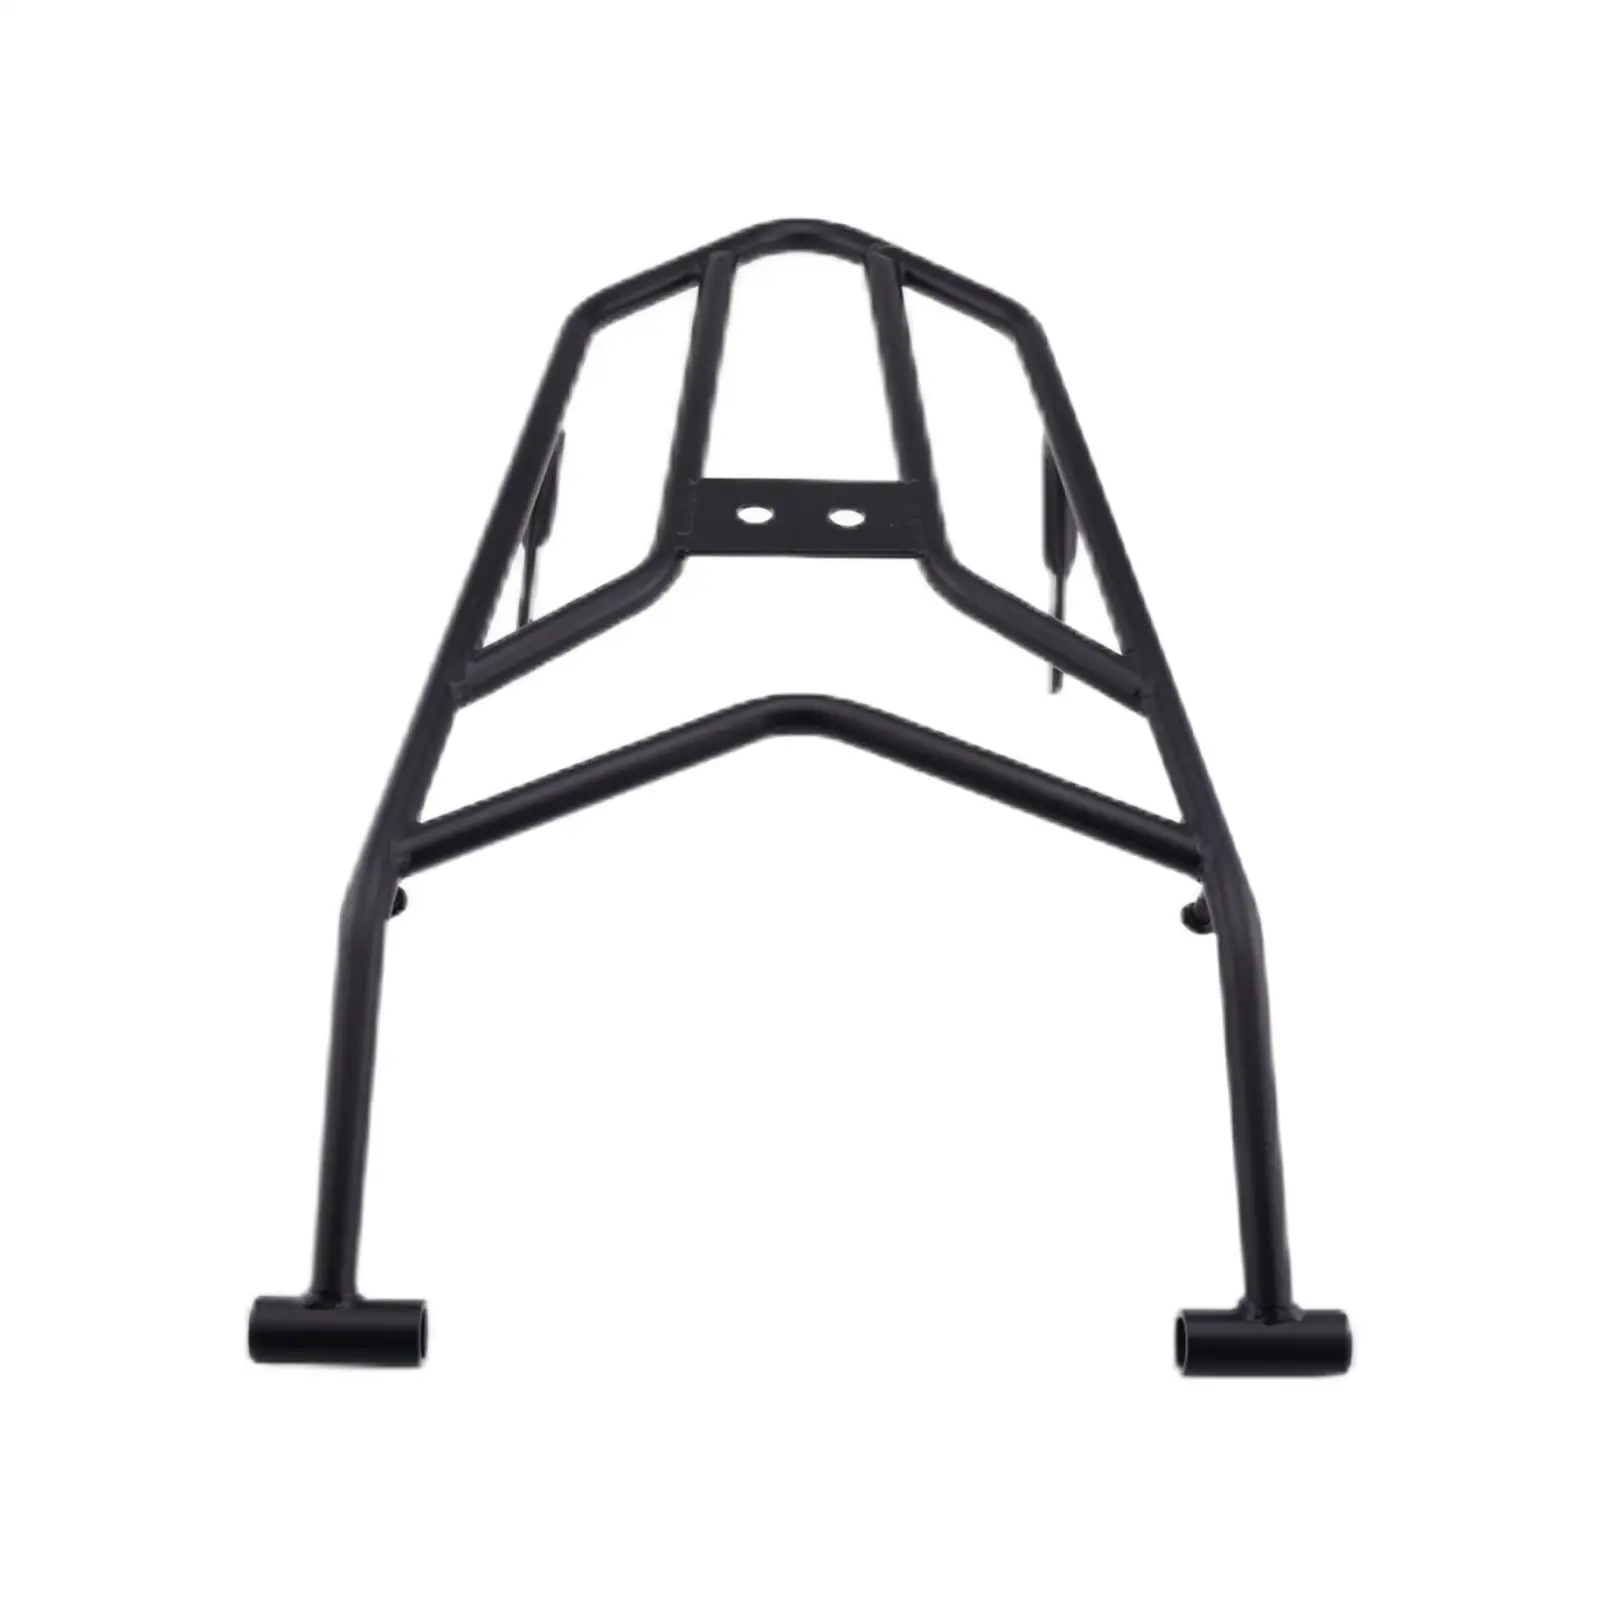 Motorcycle Rear Tail Rack Motorcycle Parts Fit for Honda Crf250L Crf300L